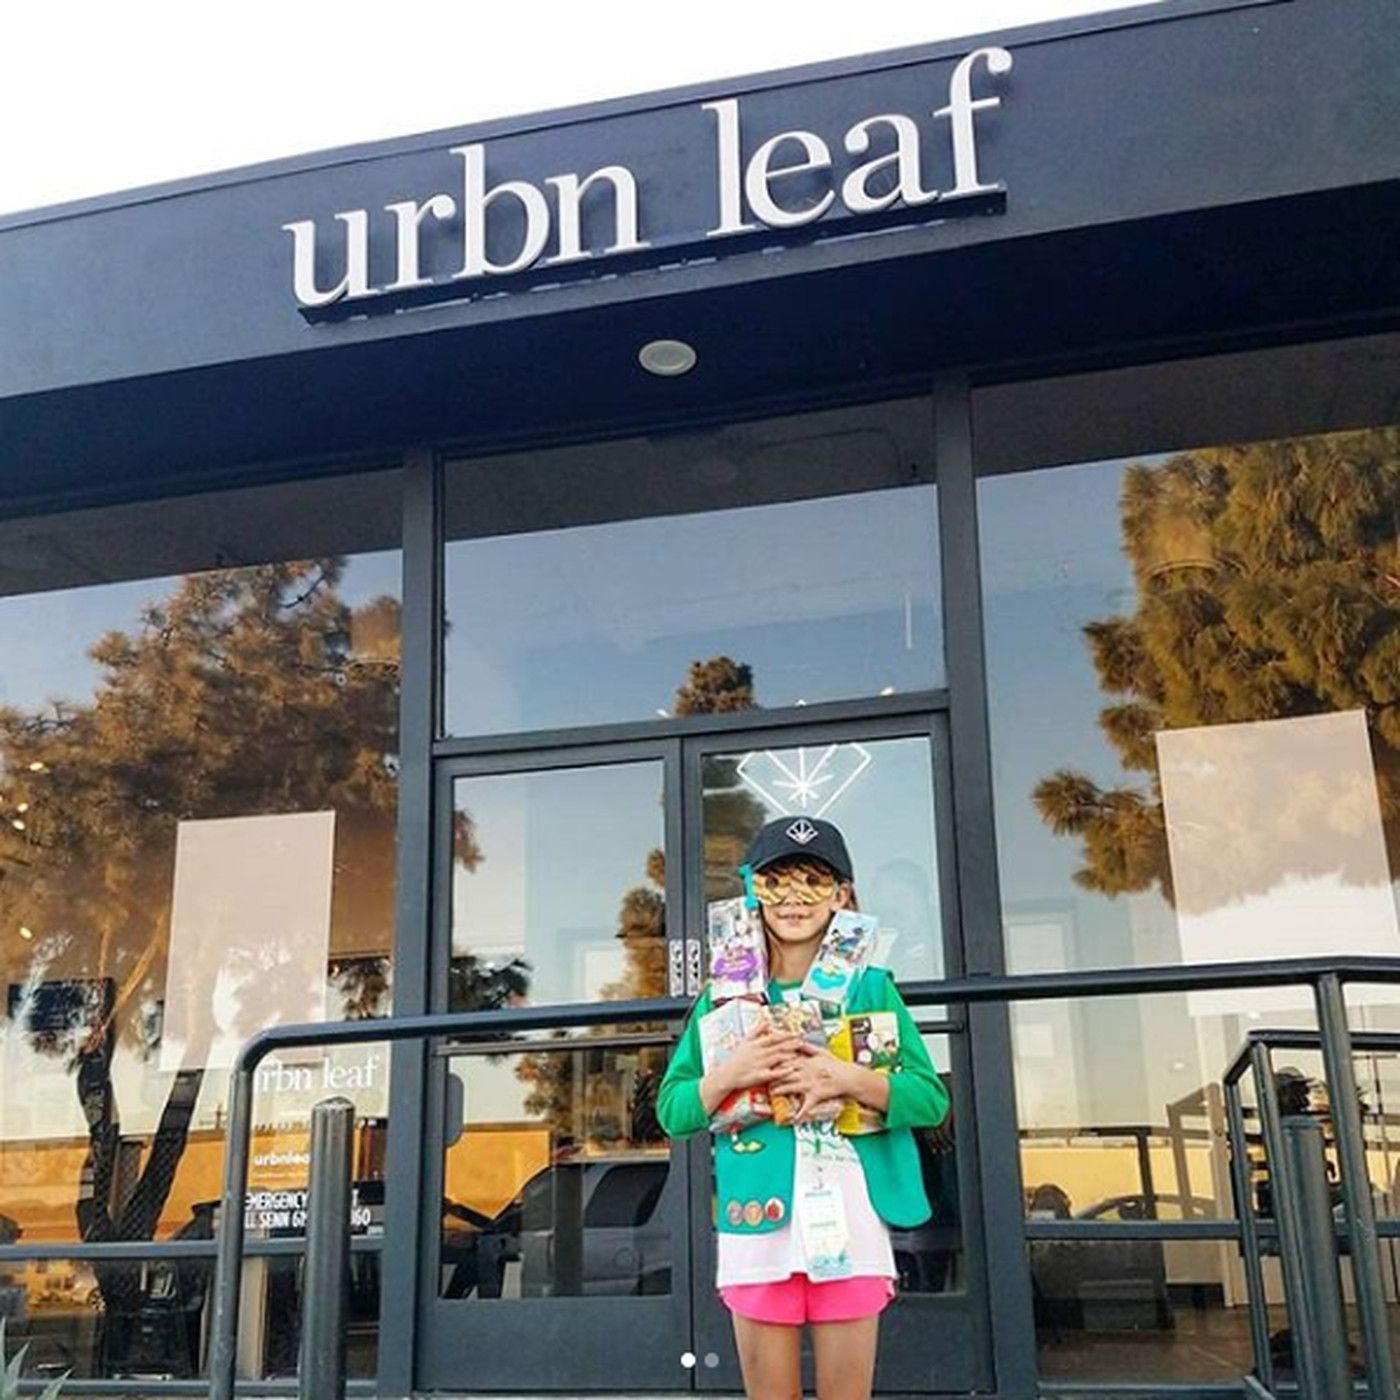 Girl scout selling cookies outside marijuana store